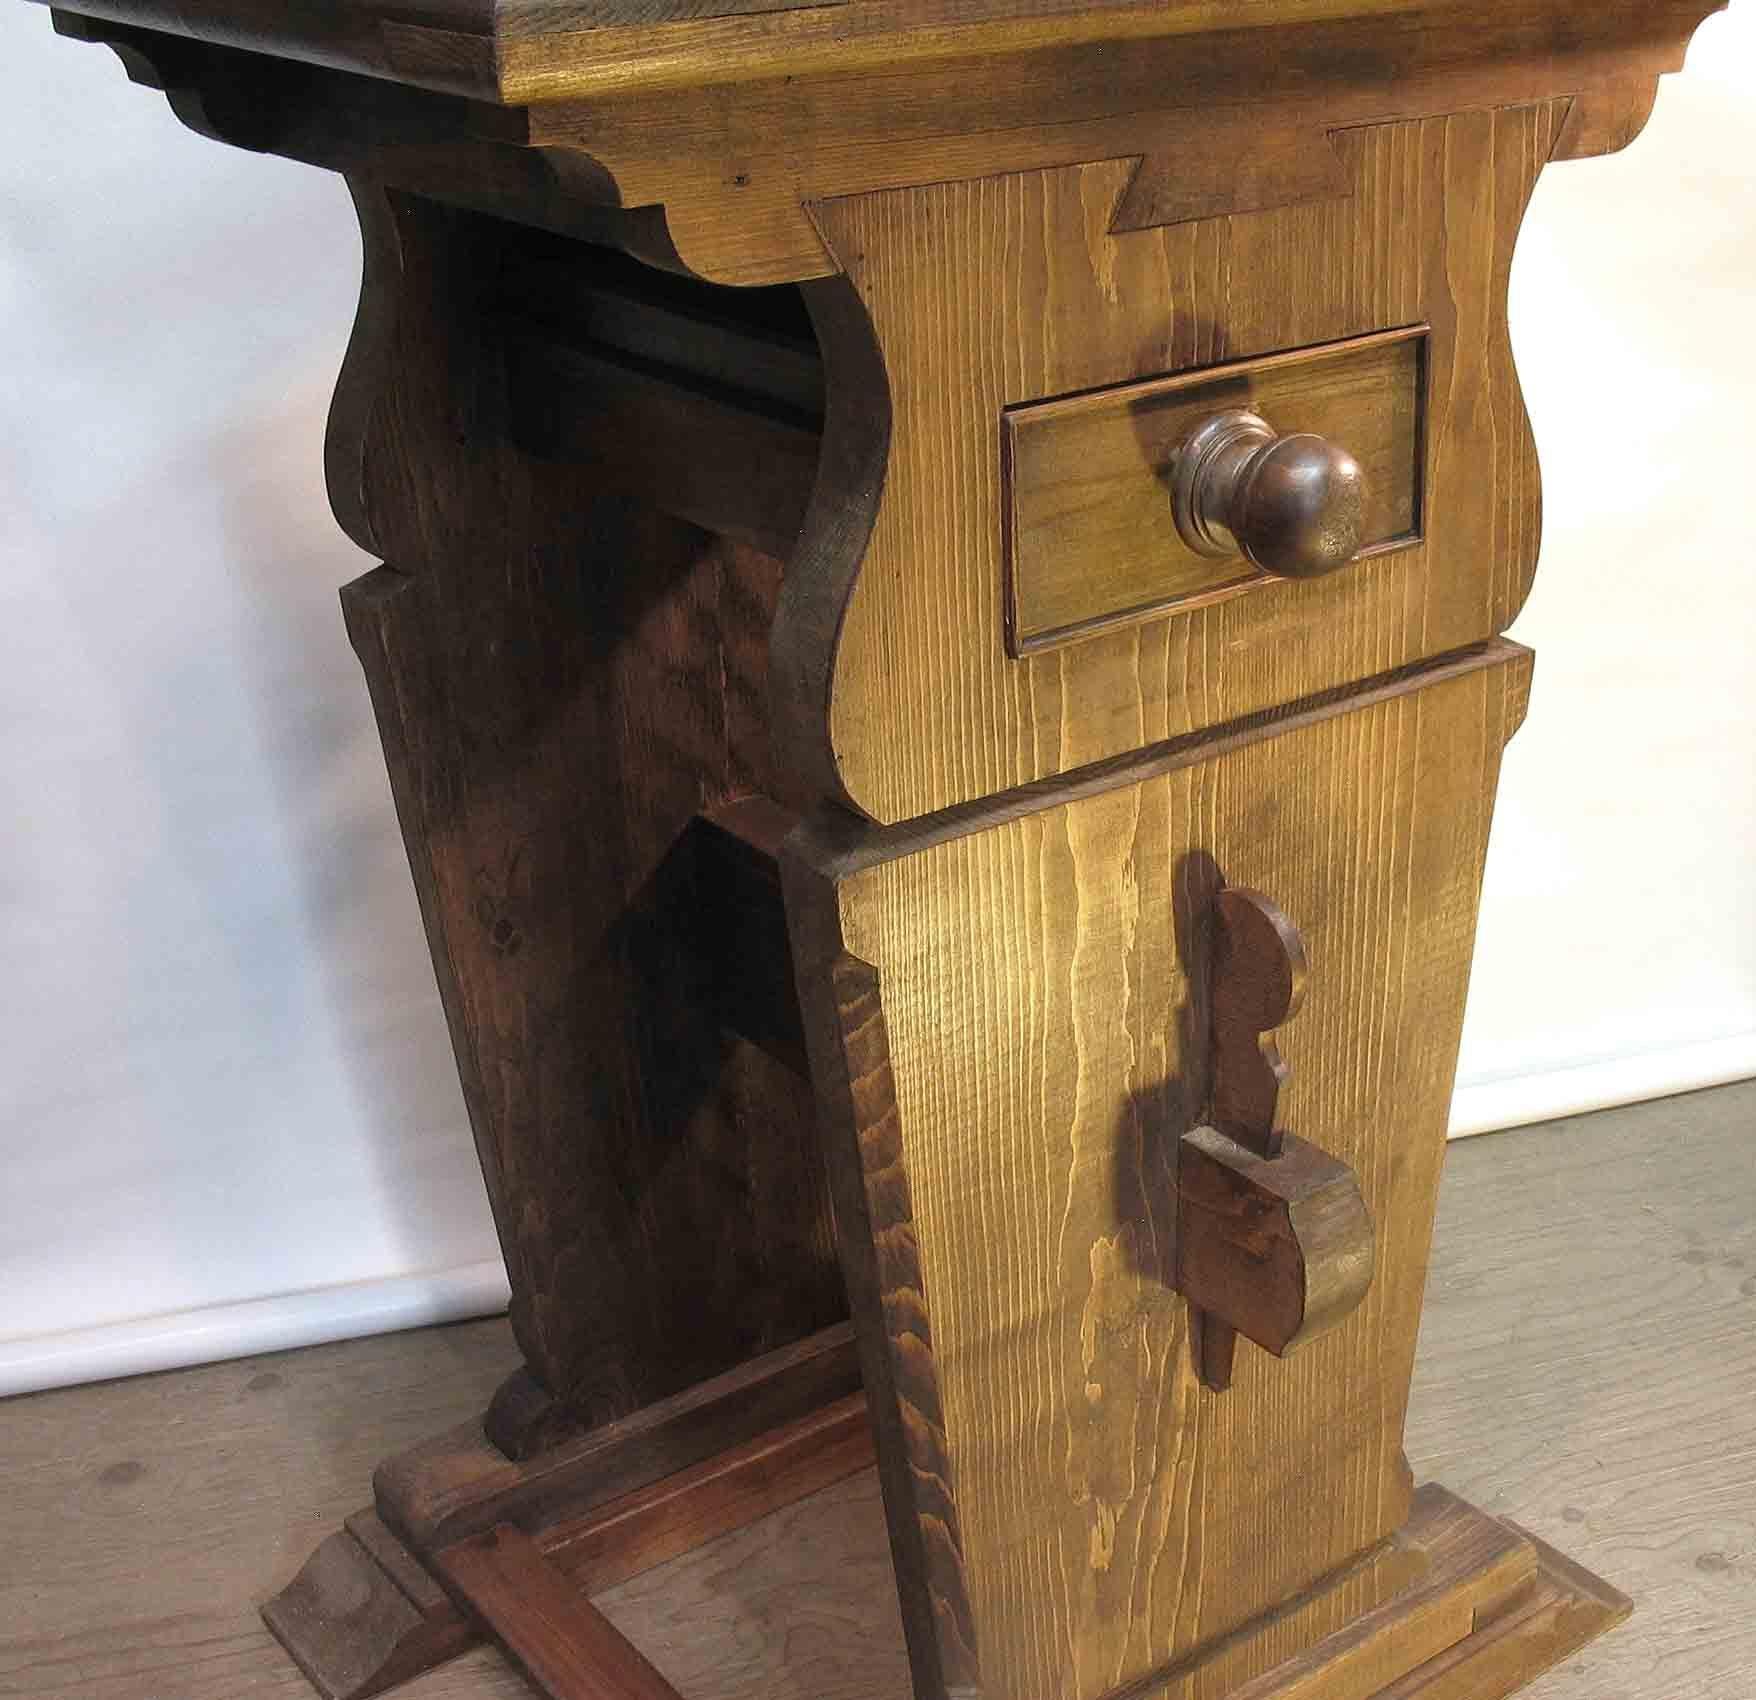 Victorian Large Impressive Cast Iron Copying/Book Press on a Trestle Wood Stand circa 1850